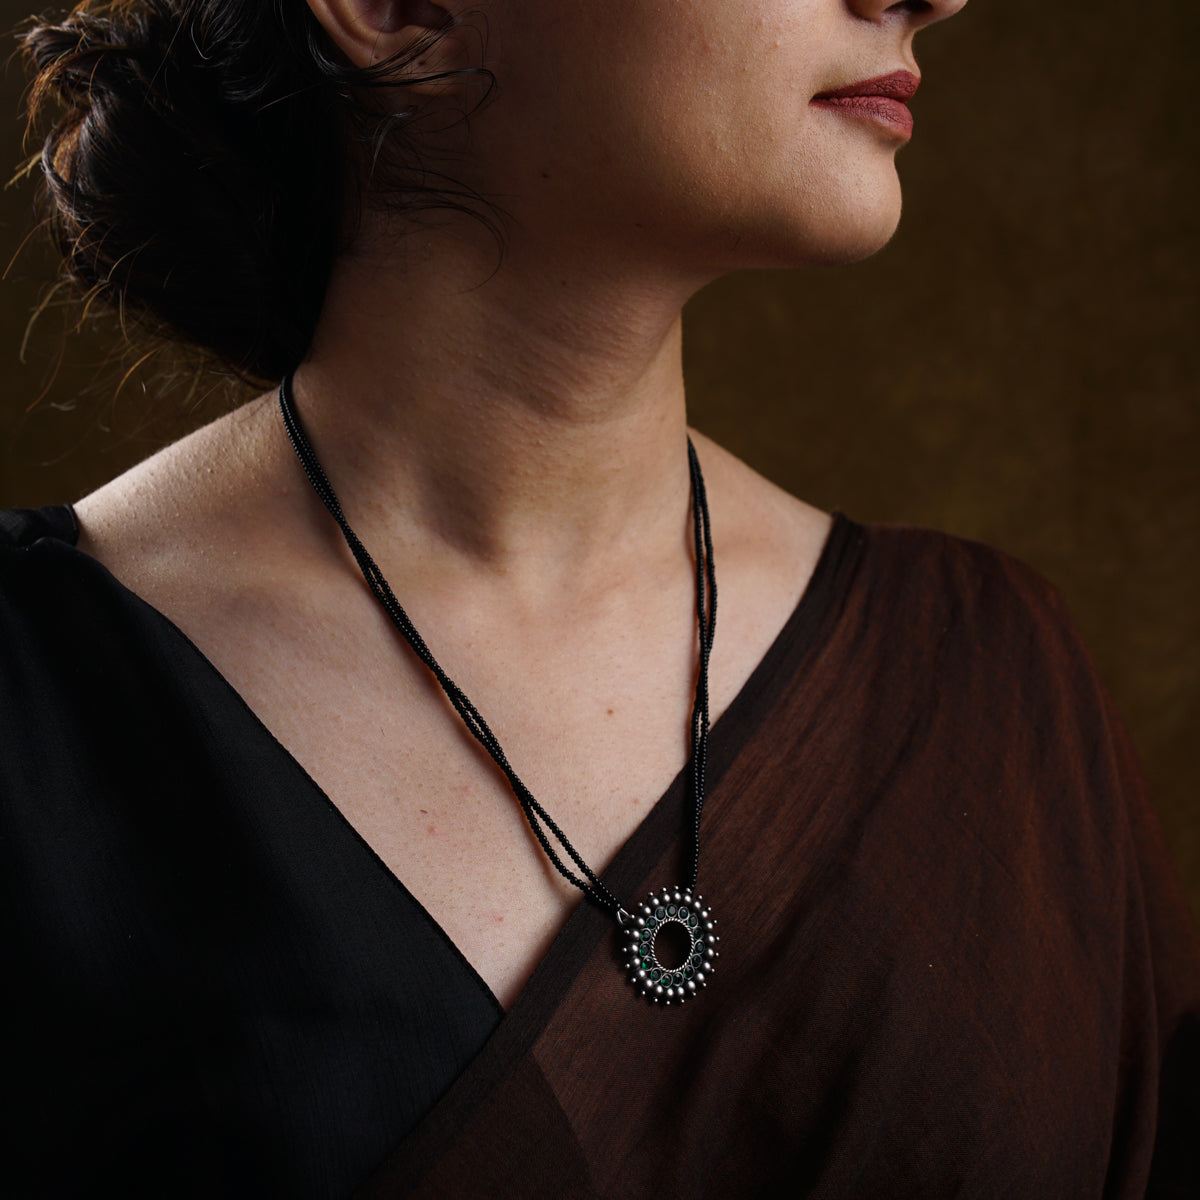 a woman wearing a brown shirt and a necklace